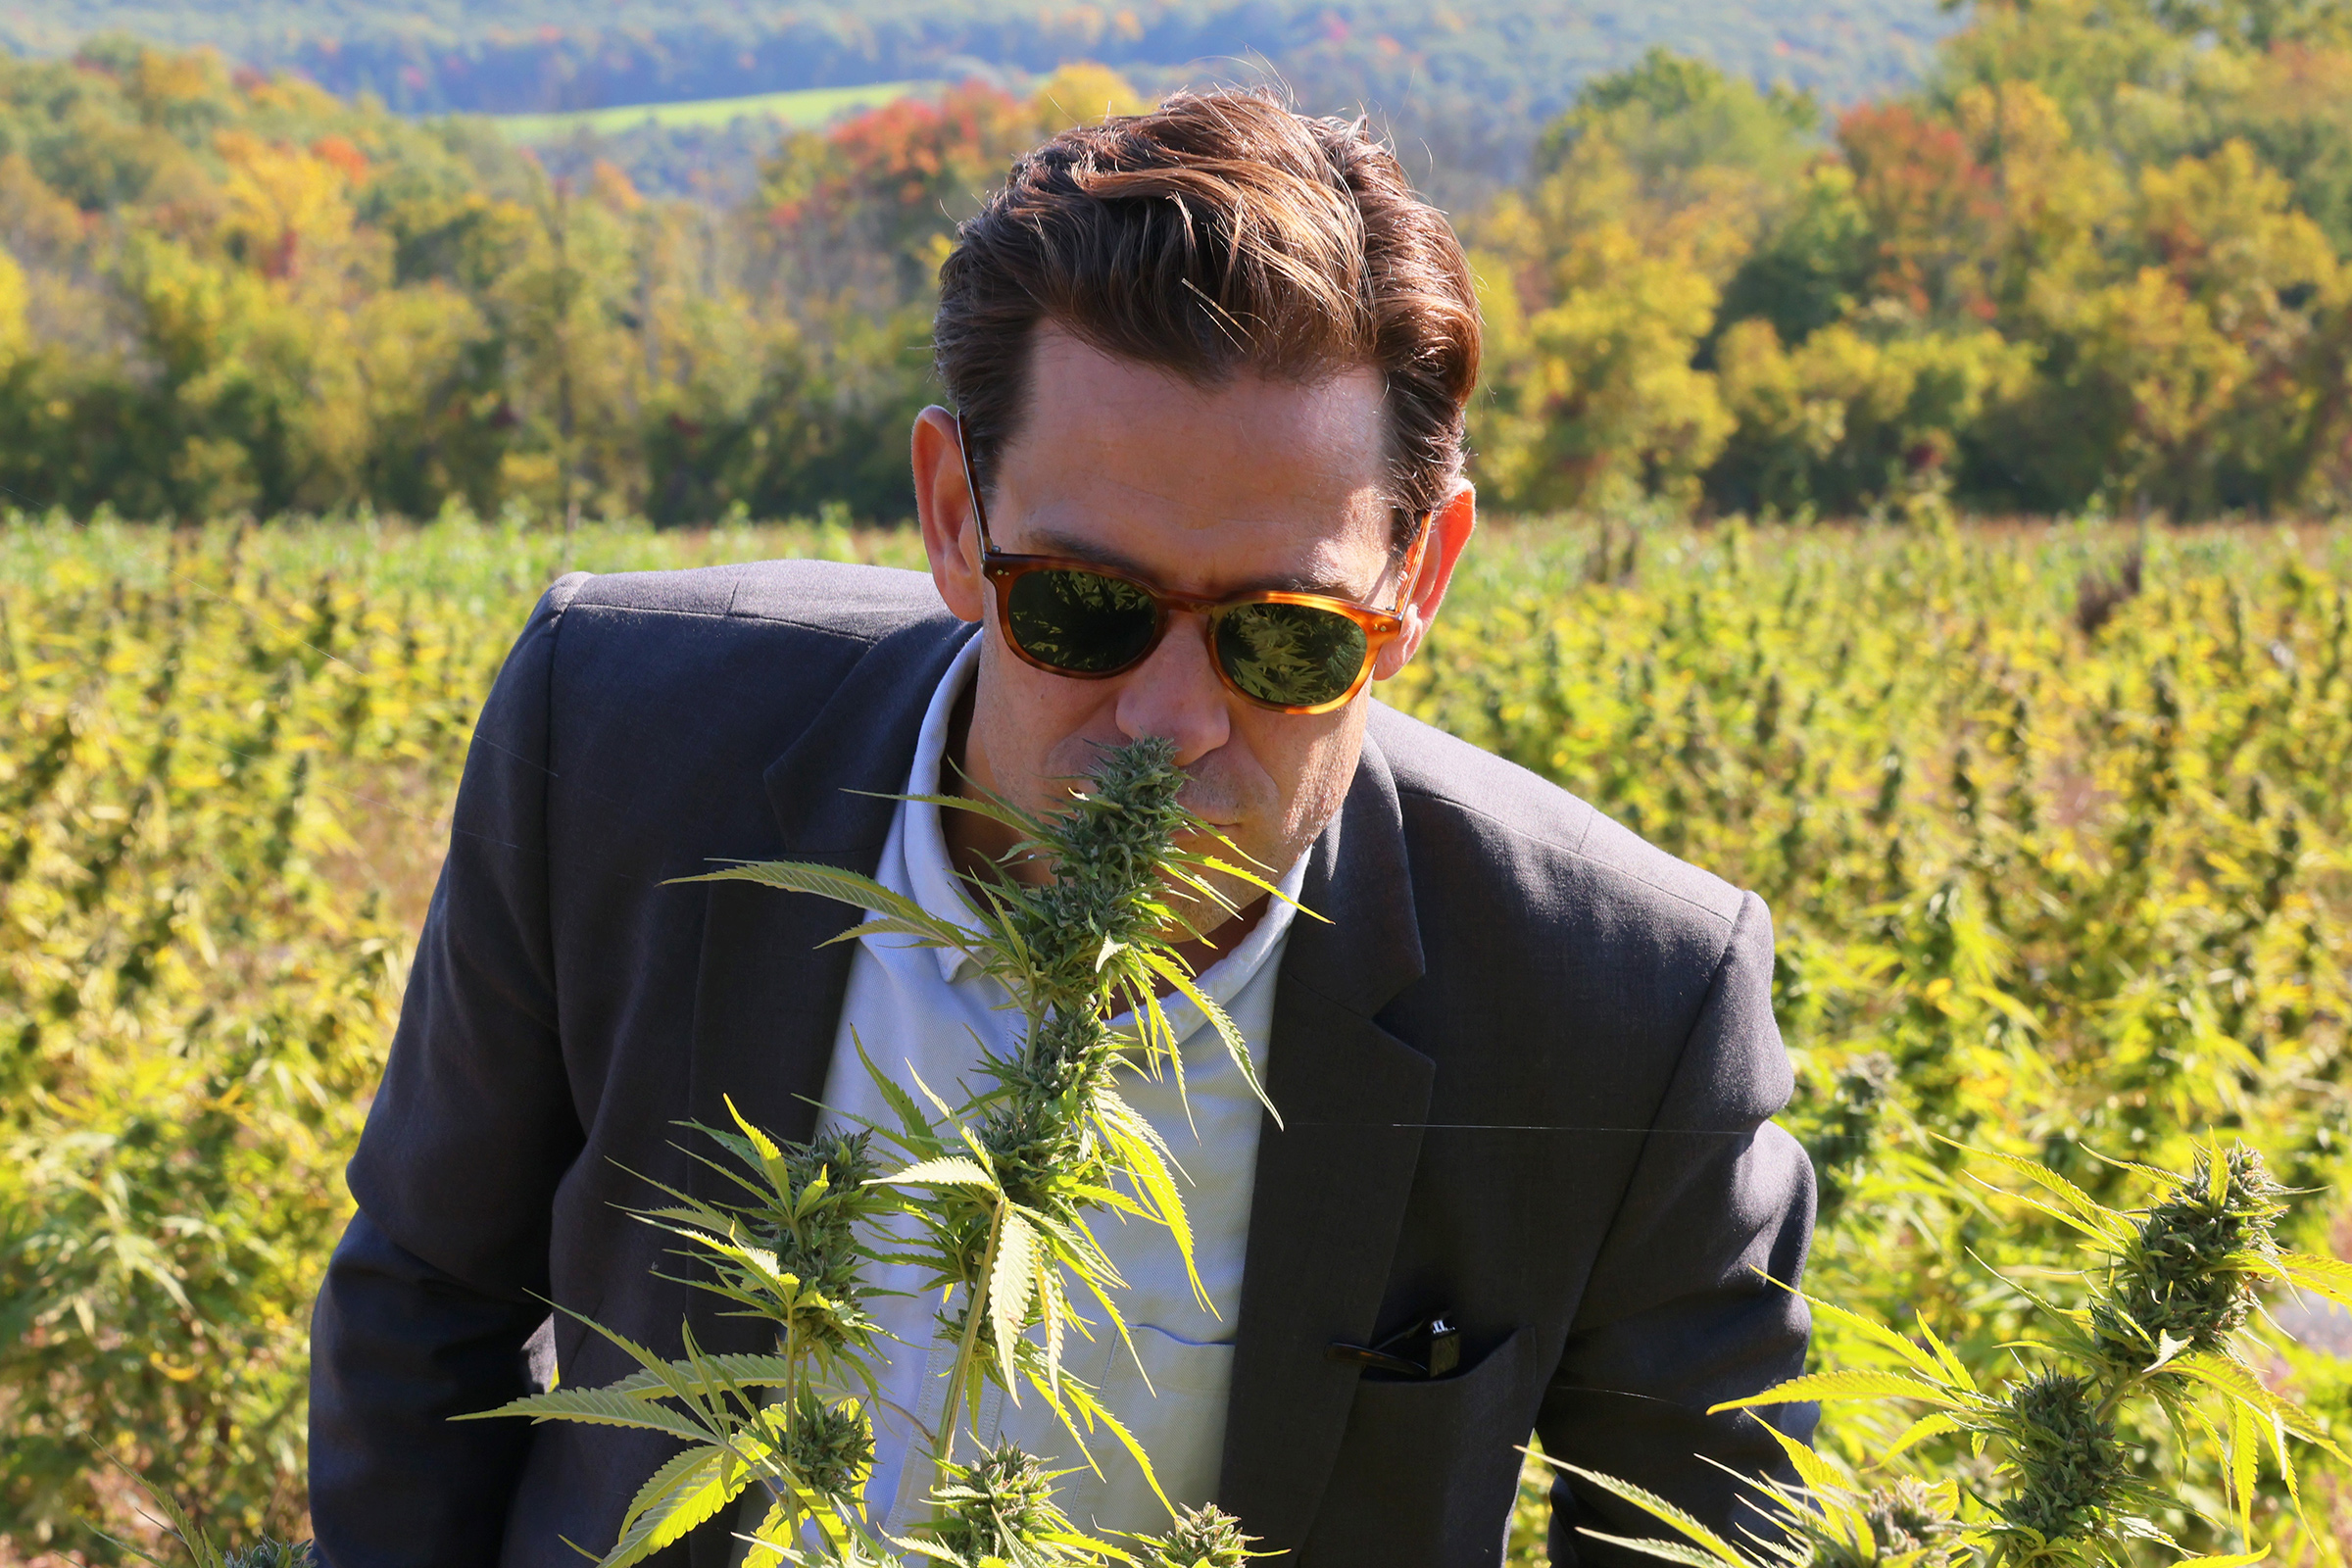 Axel Bernabe, Chief of Staff & Senior Director of Policy at the New York Office of Cannabis Management, smells a cannabis plant during a farm tour of Claudine Field Apothecary on October 7 in Columbia County, New York.  (Michael M. Santiago—Getty Images)